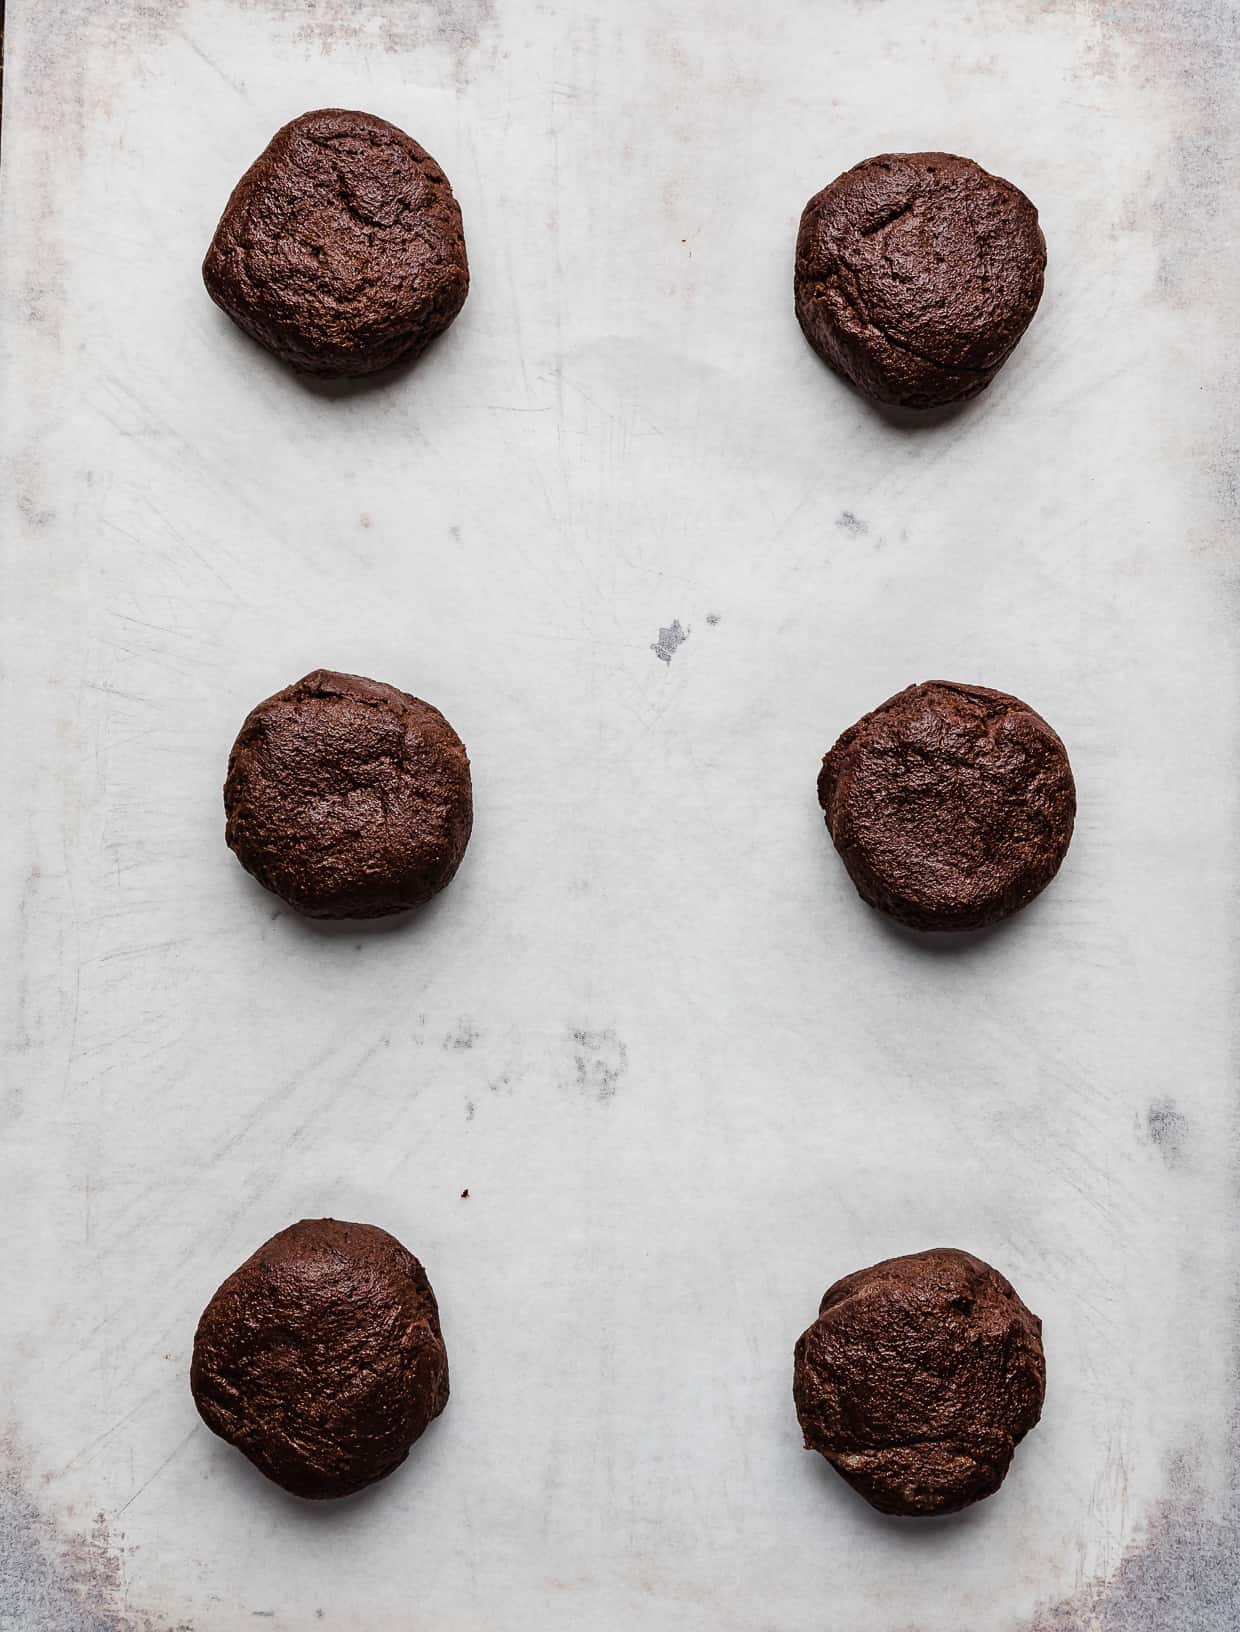 Six chocolate cookie dough balls on a white parchment paper.